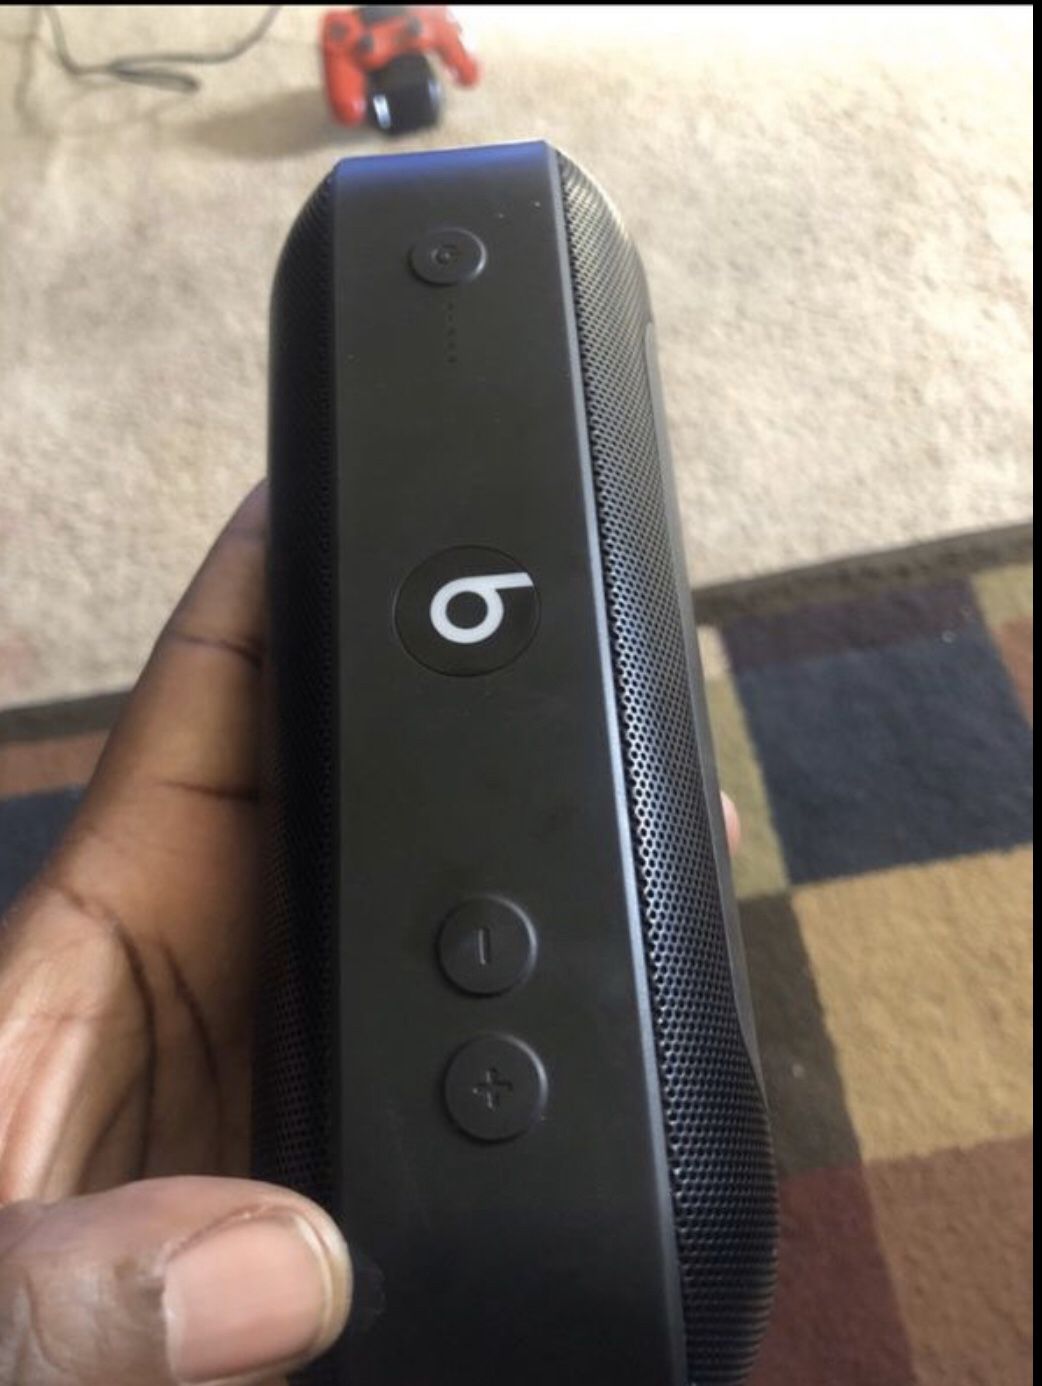 3rd Gen beats pill perfect condition/with charger